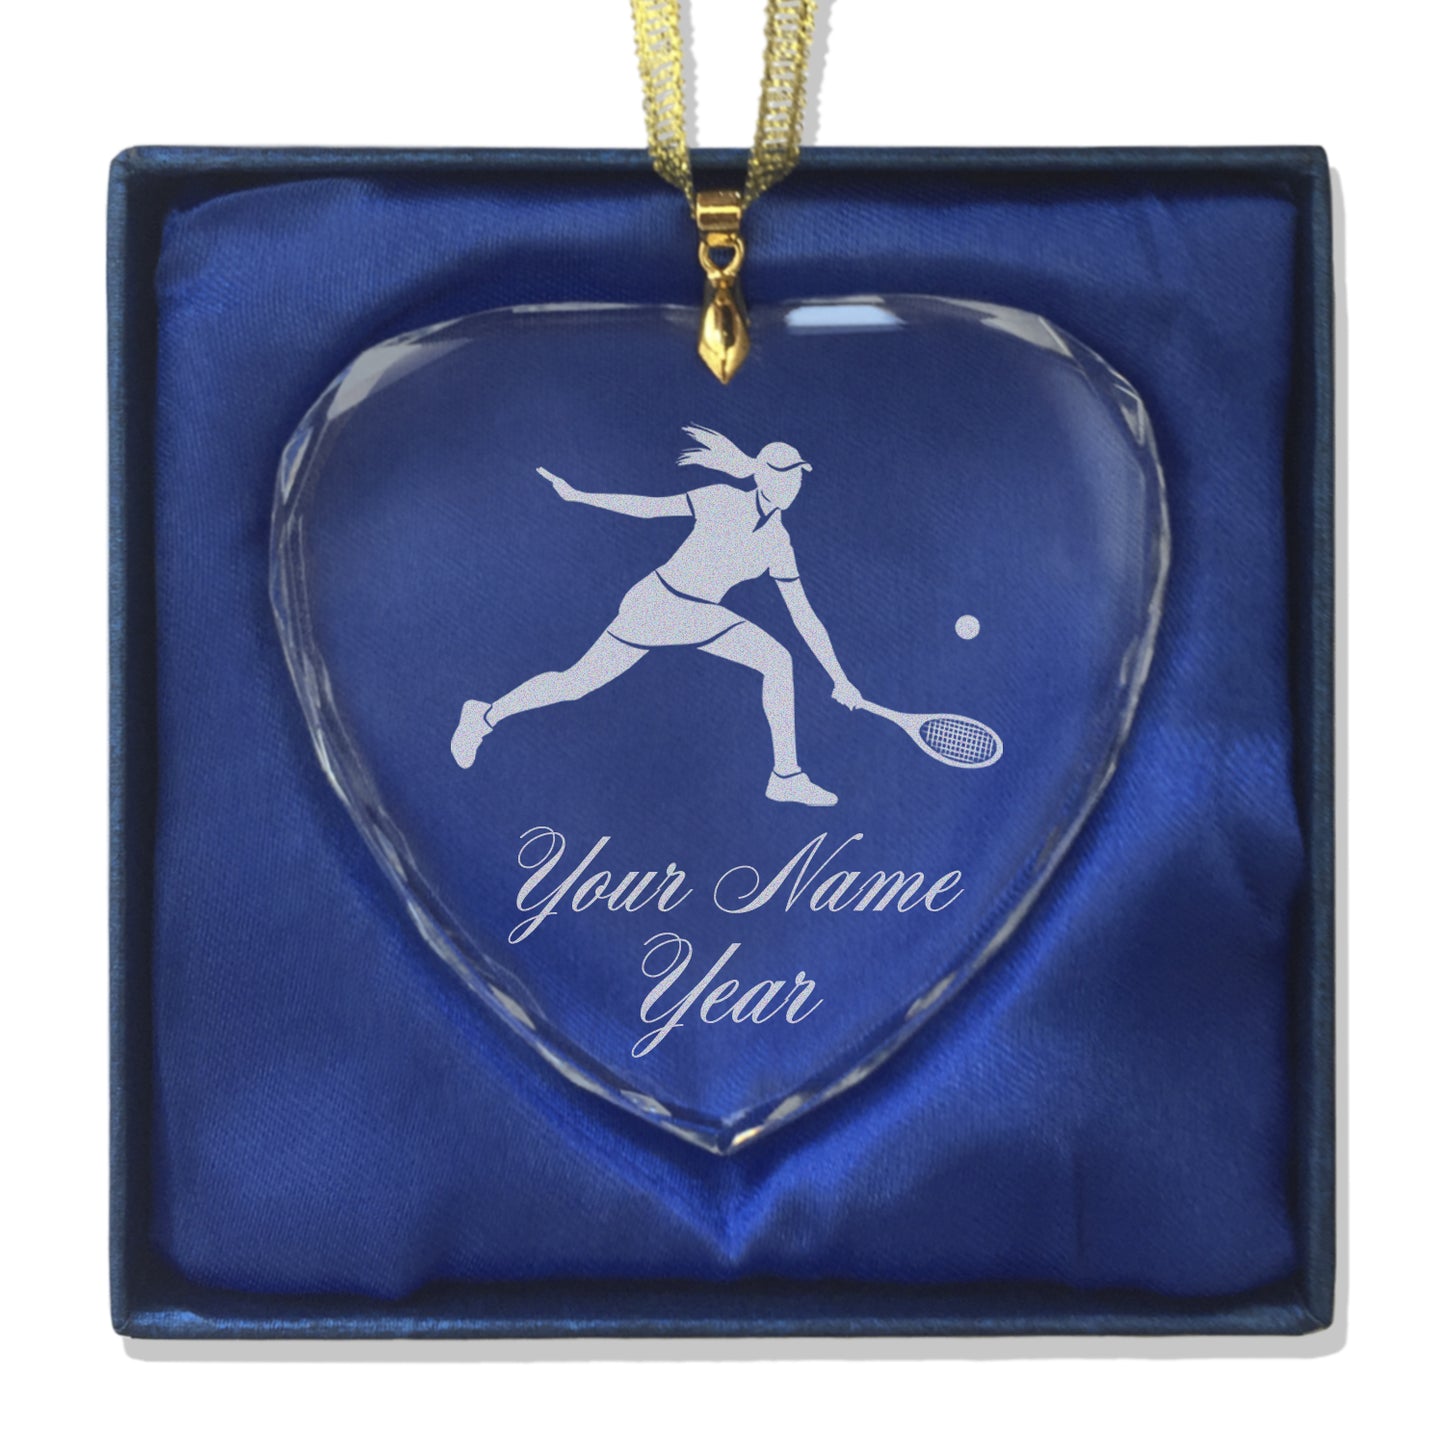 LaserGram Christmas Ornament, Tennis Player Woman, Personalized Engraving Included (Heart Shape)